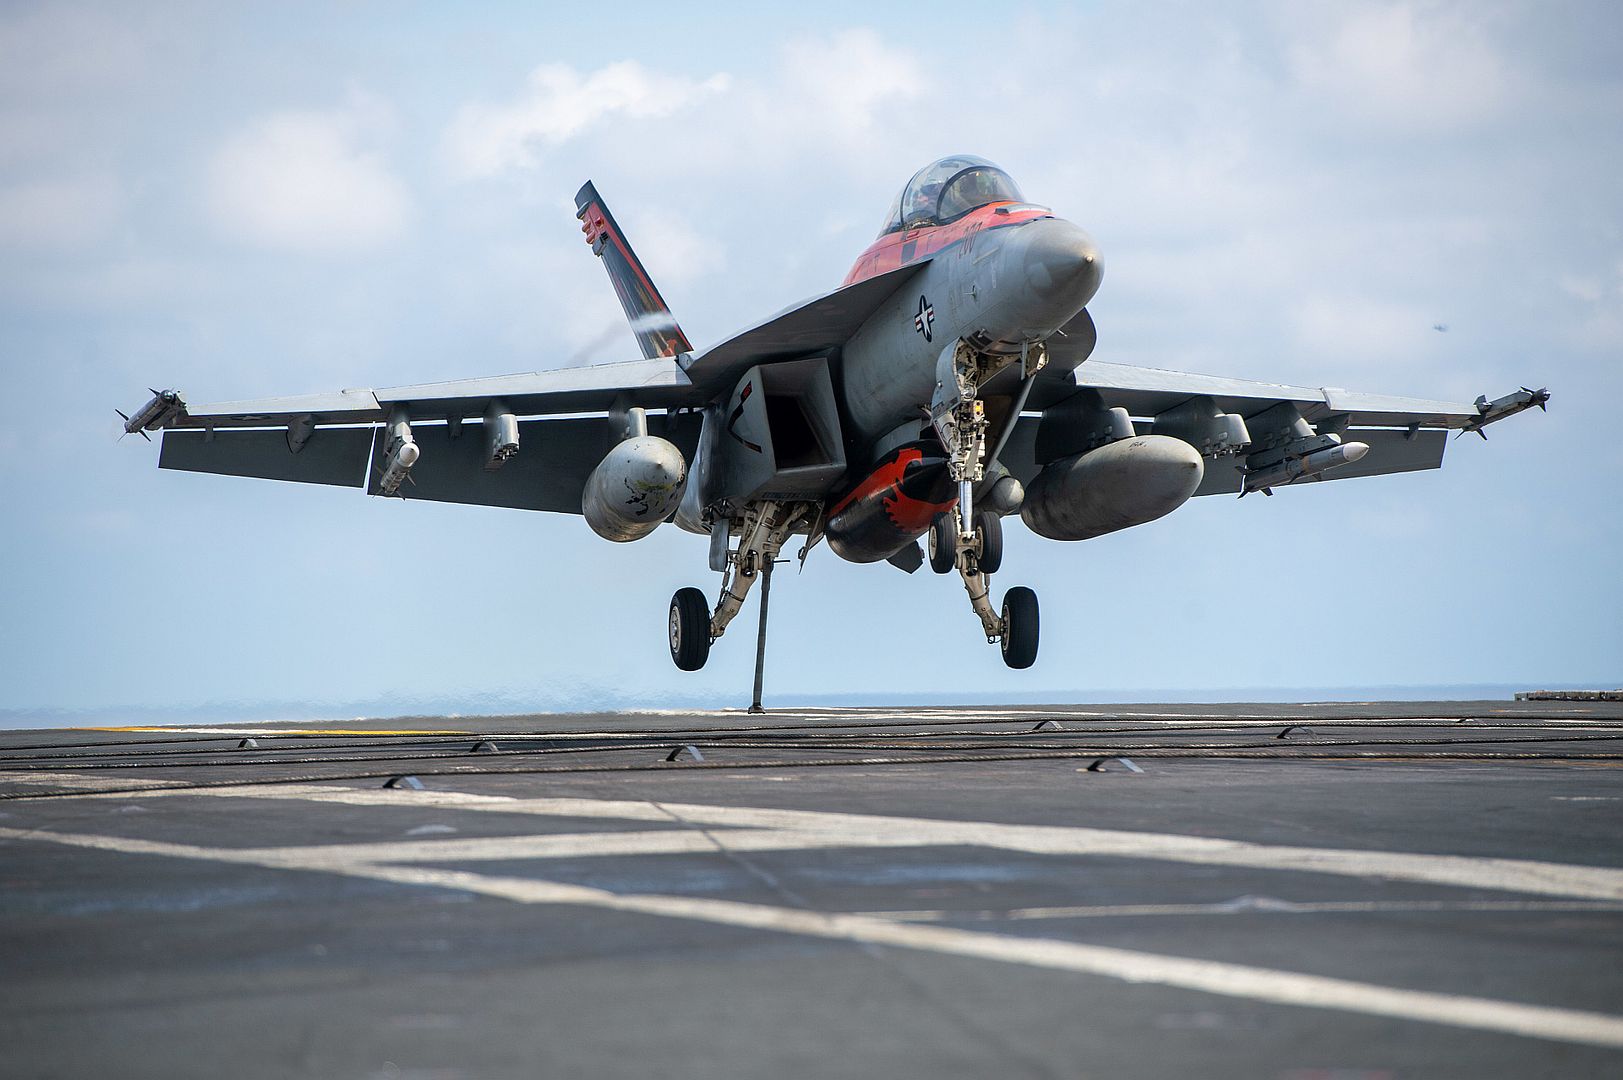 18F Super Hornet From The Mighty Shrikes Of Strike Fighter Squadron 94 Makes An Arrested Landing On The Aircraft Carrier USS Nimitz AxesnnqwsWNUKctjMTRciS